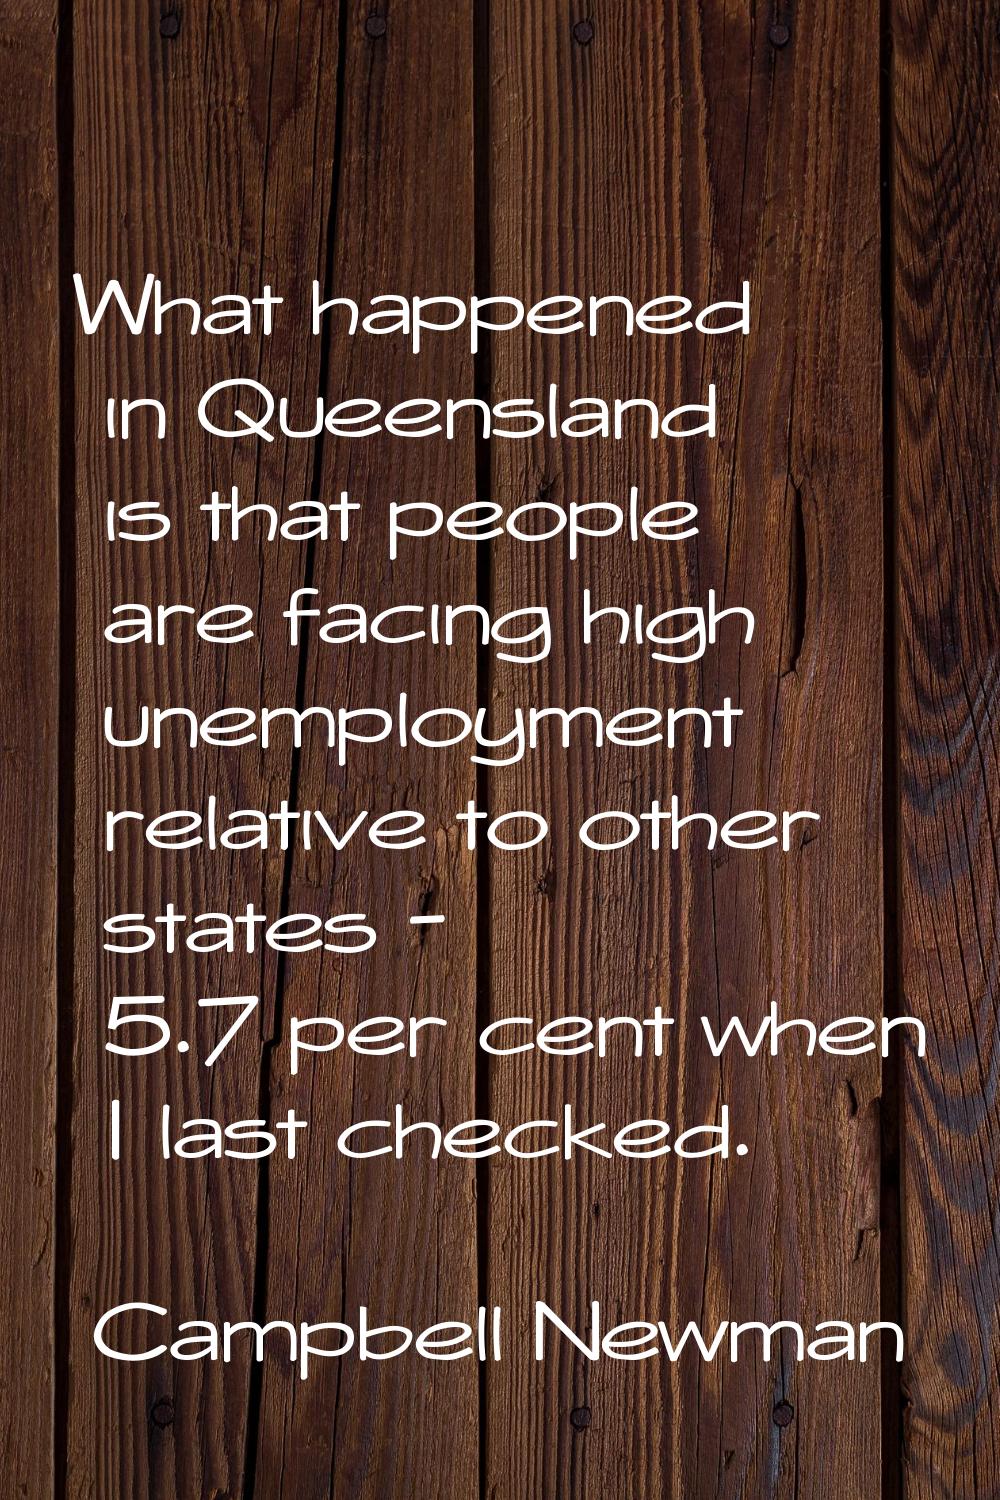 What happened in Queensland is that people are facing high unemployment relative to other states - 